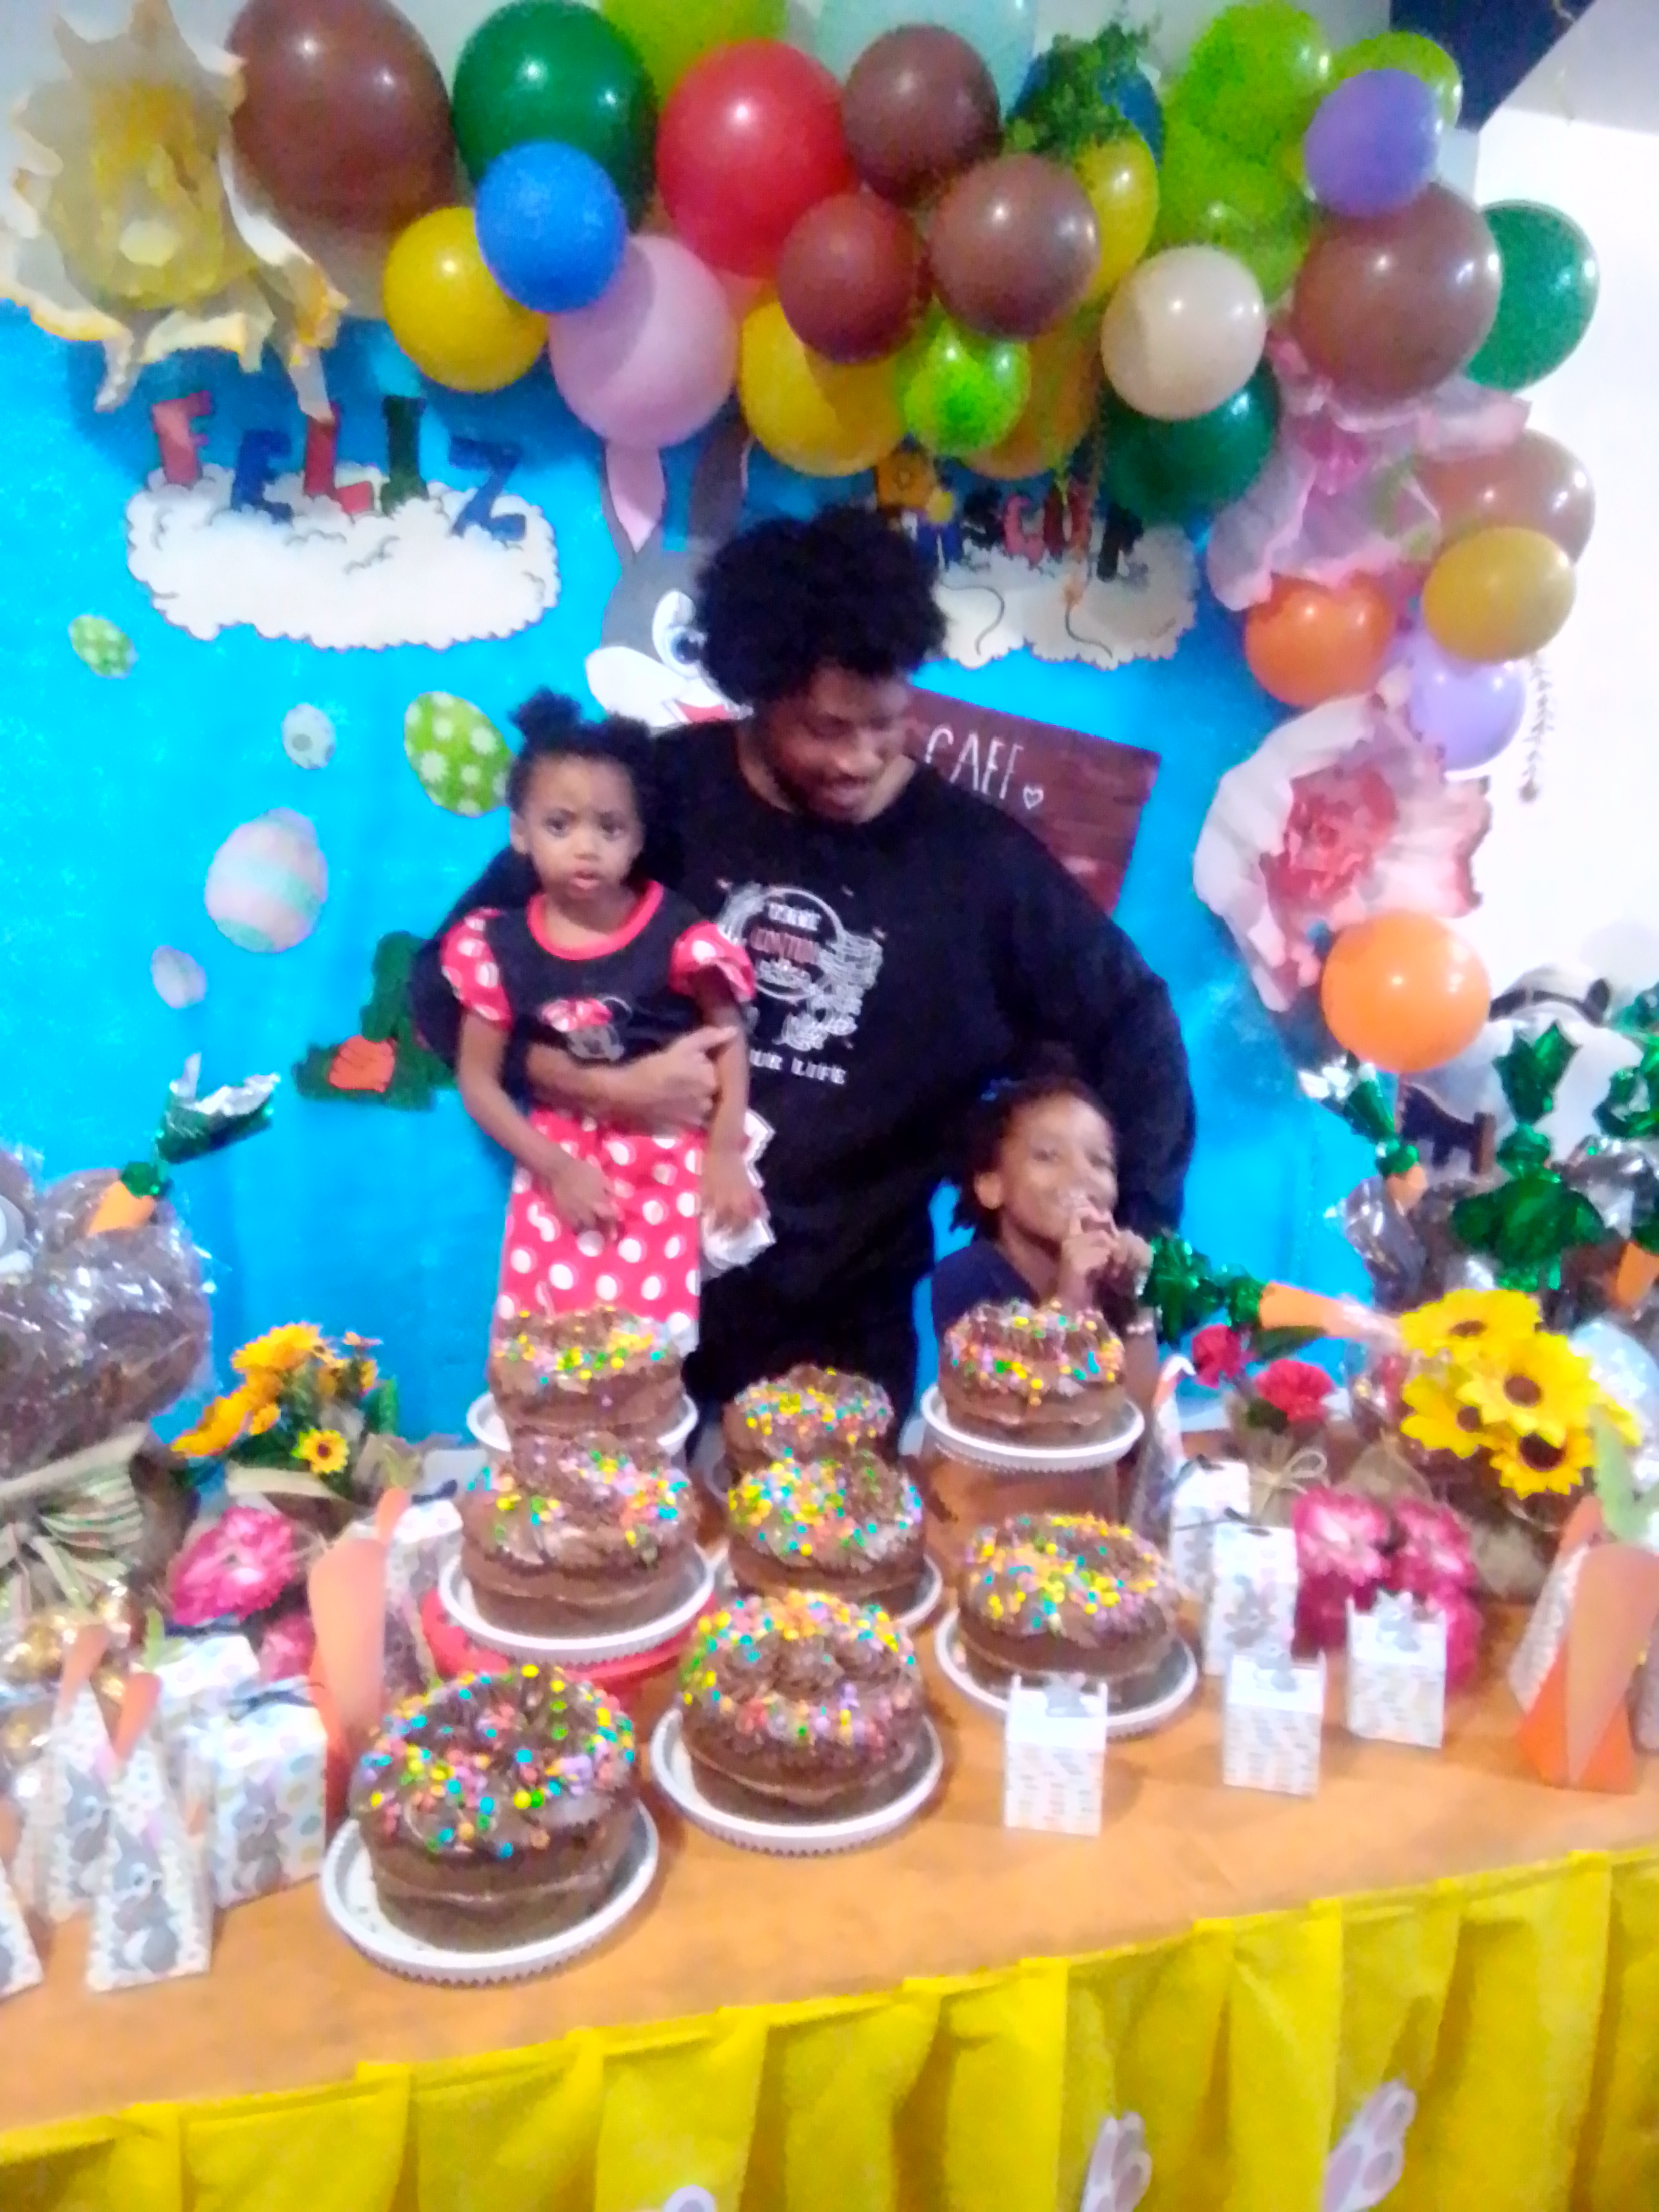 Big King Kimroy Bailey, Fighting Princess Kaleeyon Trott Bailey and Rainbow Princess Keilah Trott Bailey having fun together on the family chanllenge in Brasil enjoying a grand party celebration with lots of colors and cakes